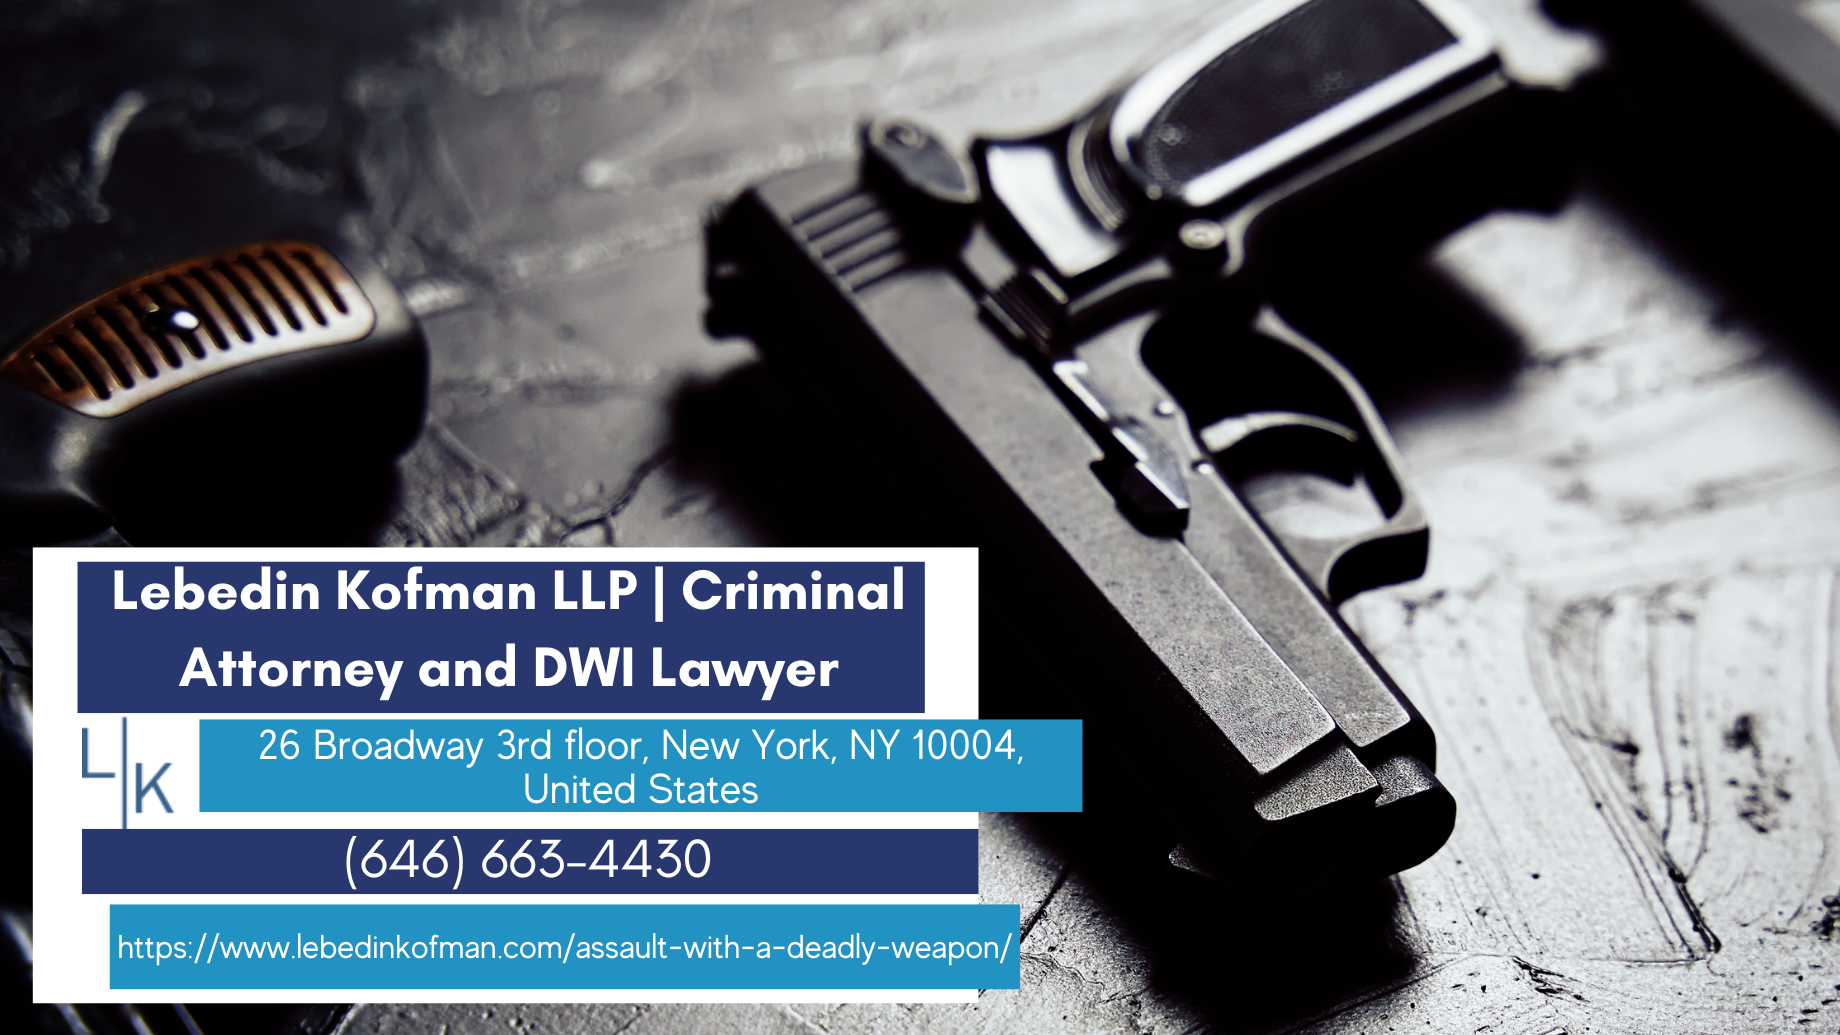 New York Criminal Defense Attorney Russ Kofman Releases Article About Assault with a Deadly Weapon